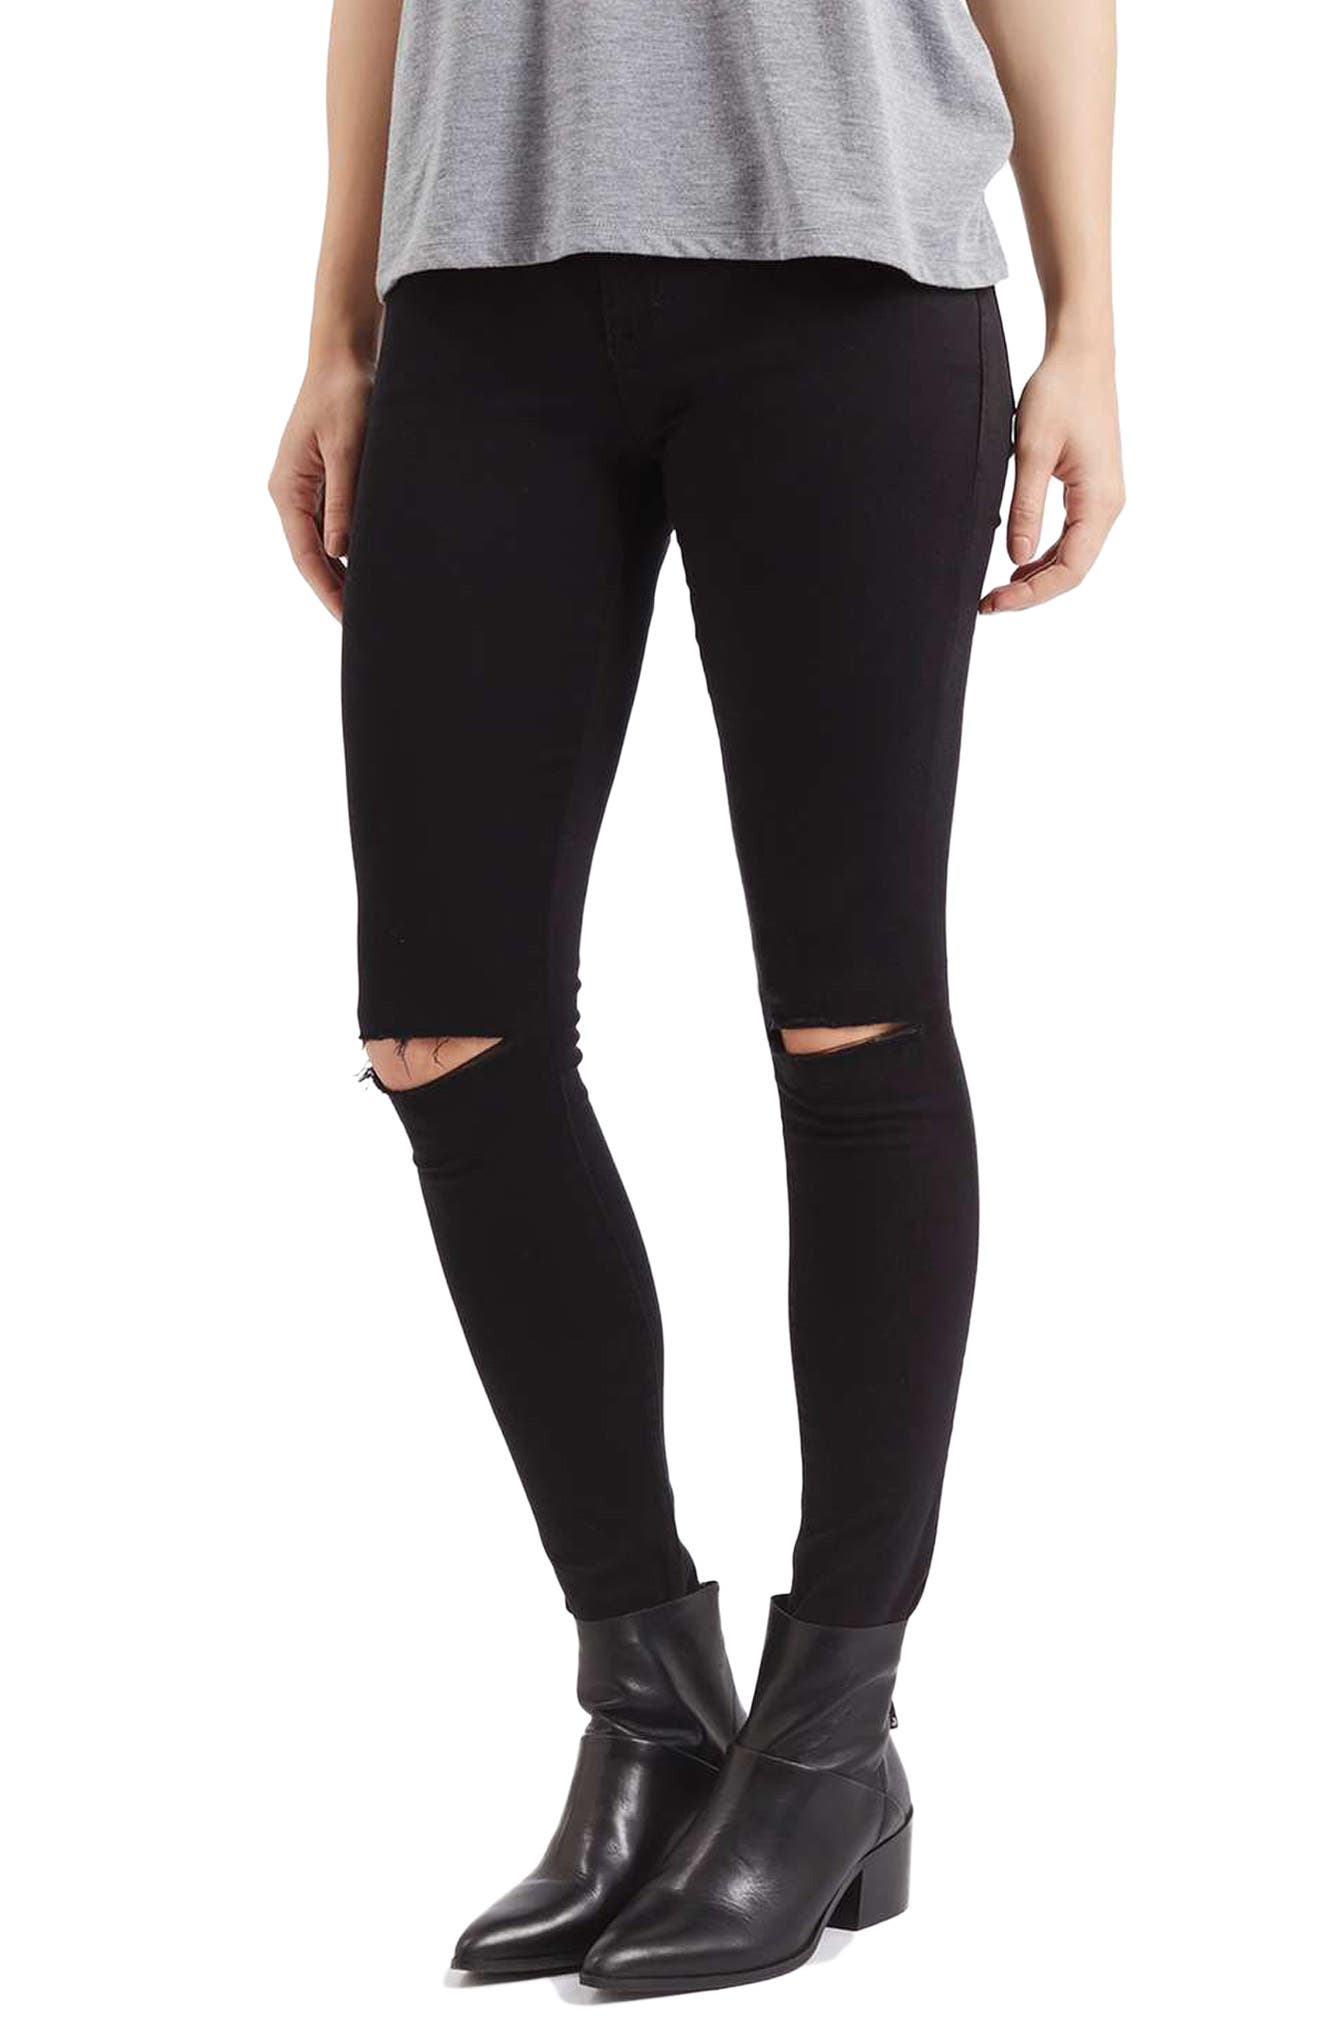 moto leigh jeans